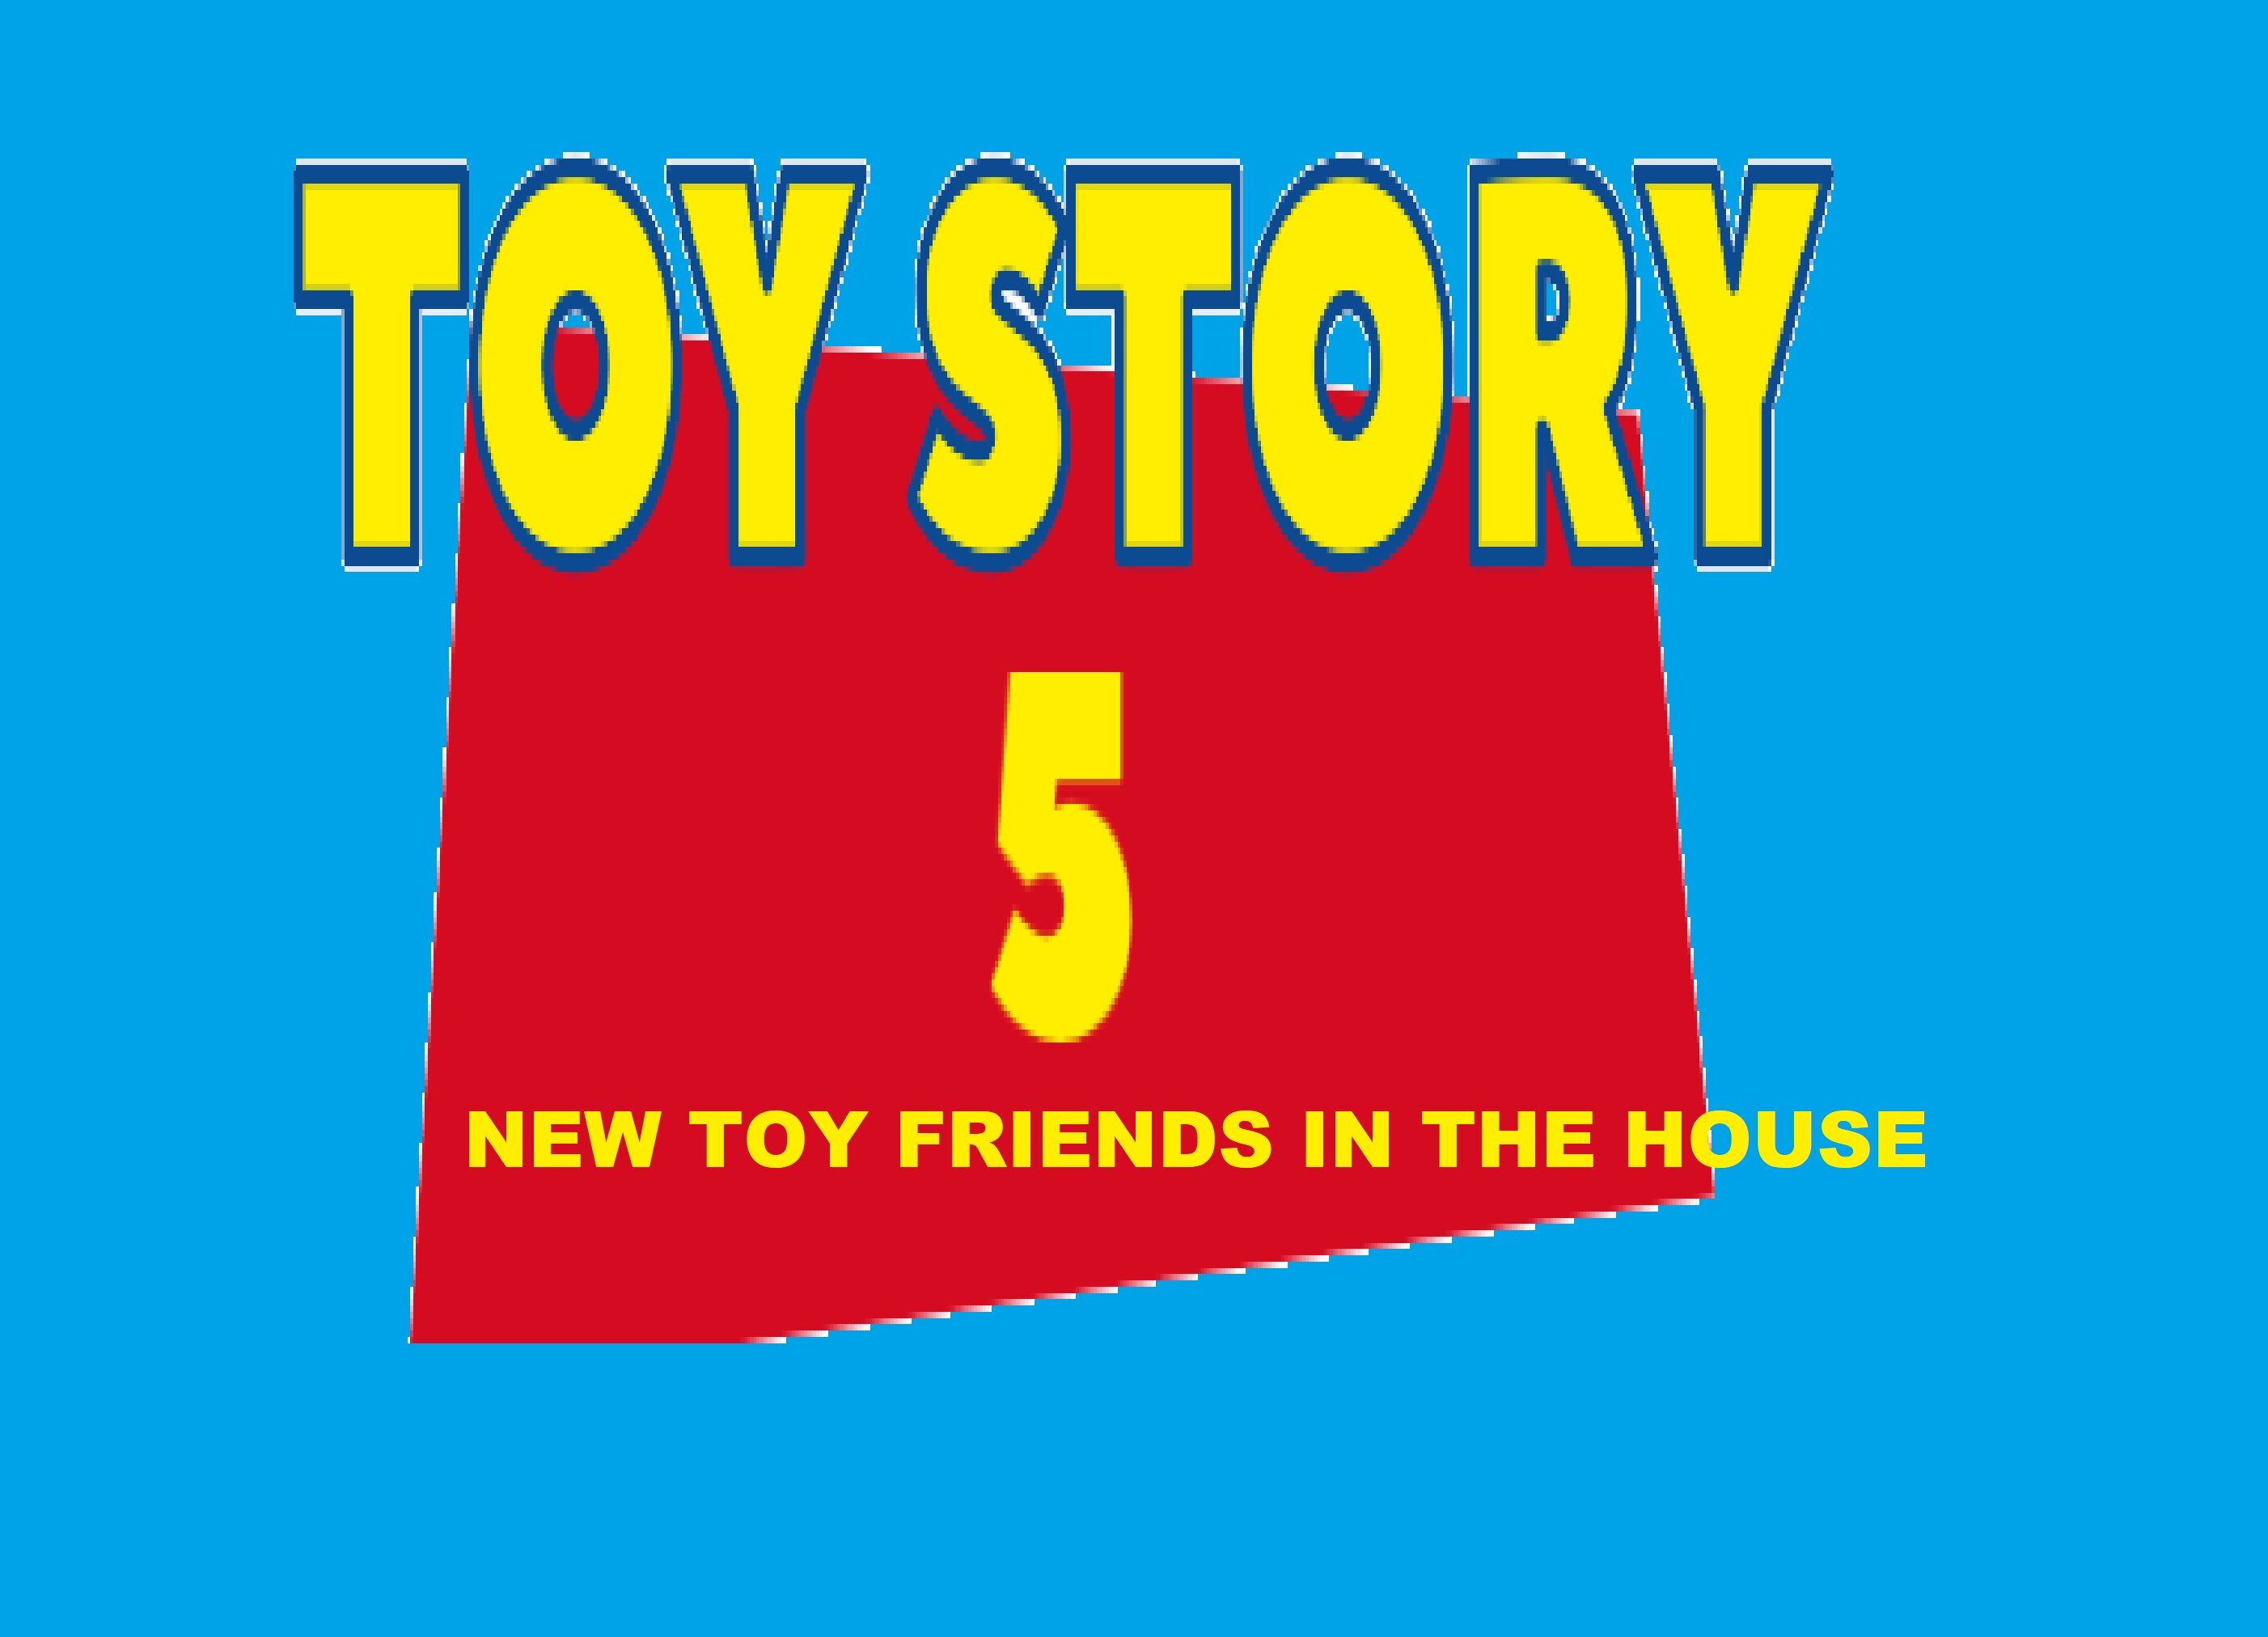 Is There Going to Be a 'Toy Story 5'? Release Date, Plot